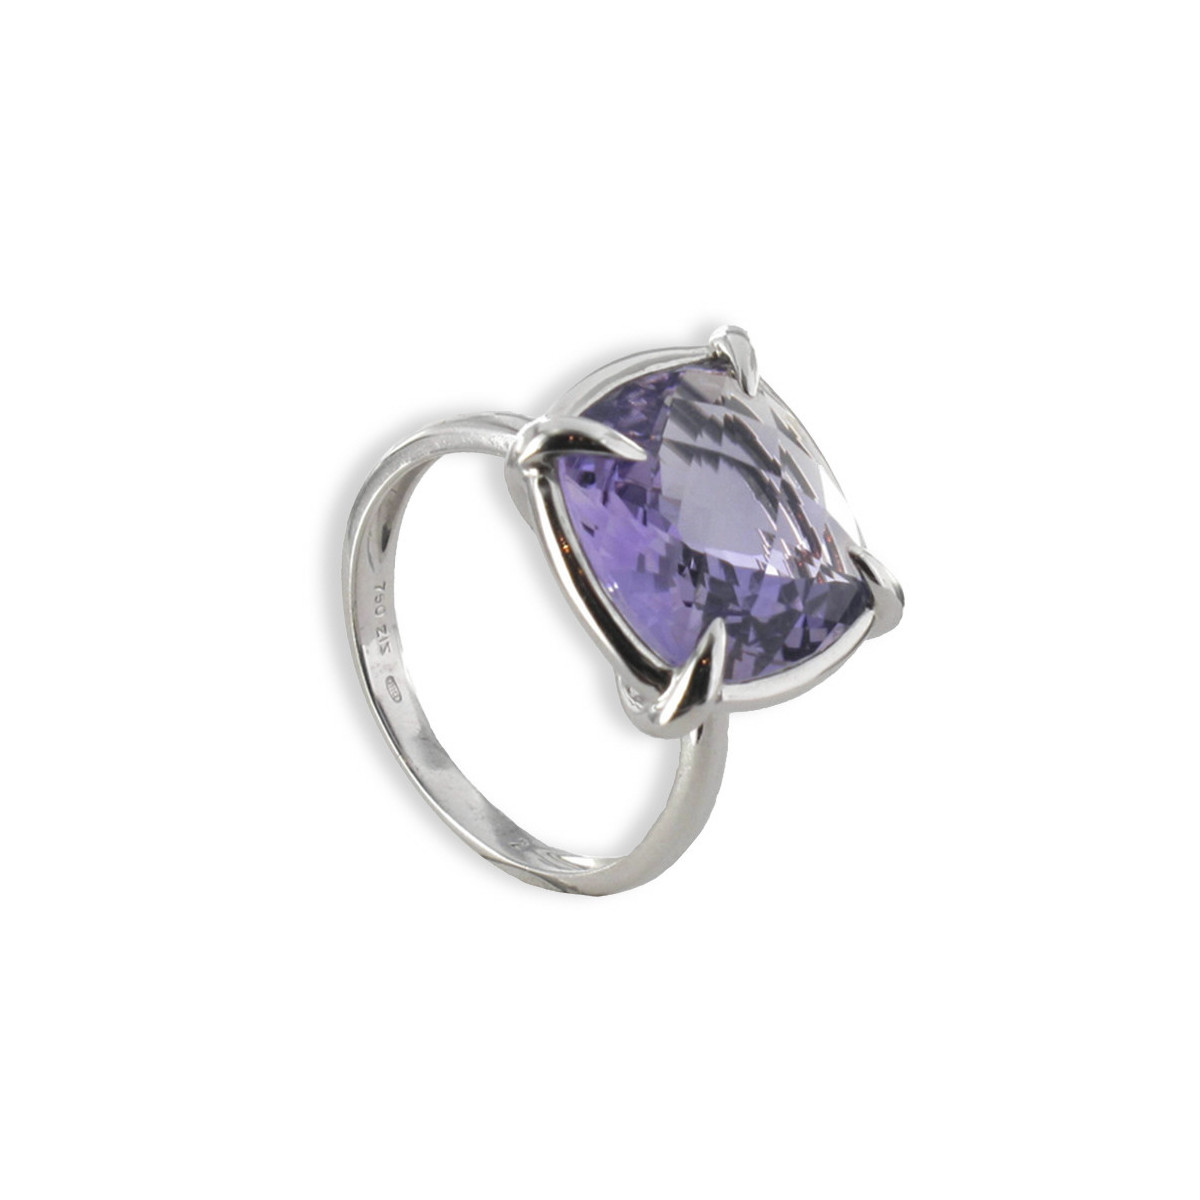 POLISHED GOLD RING WITH AMETHYST